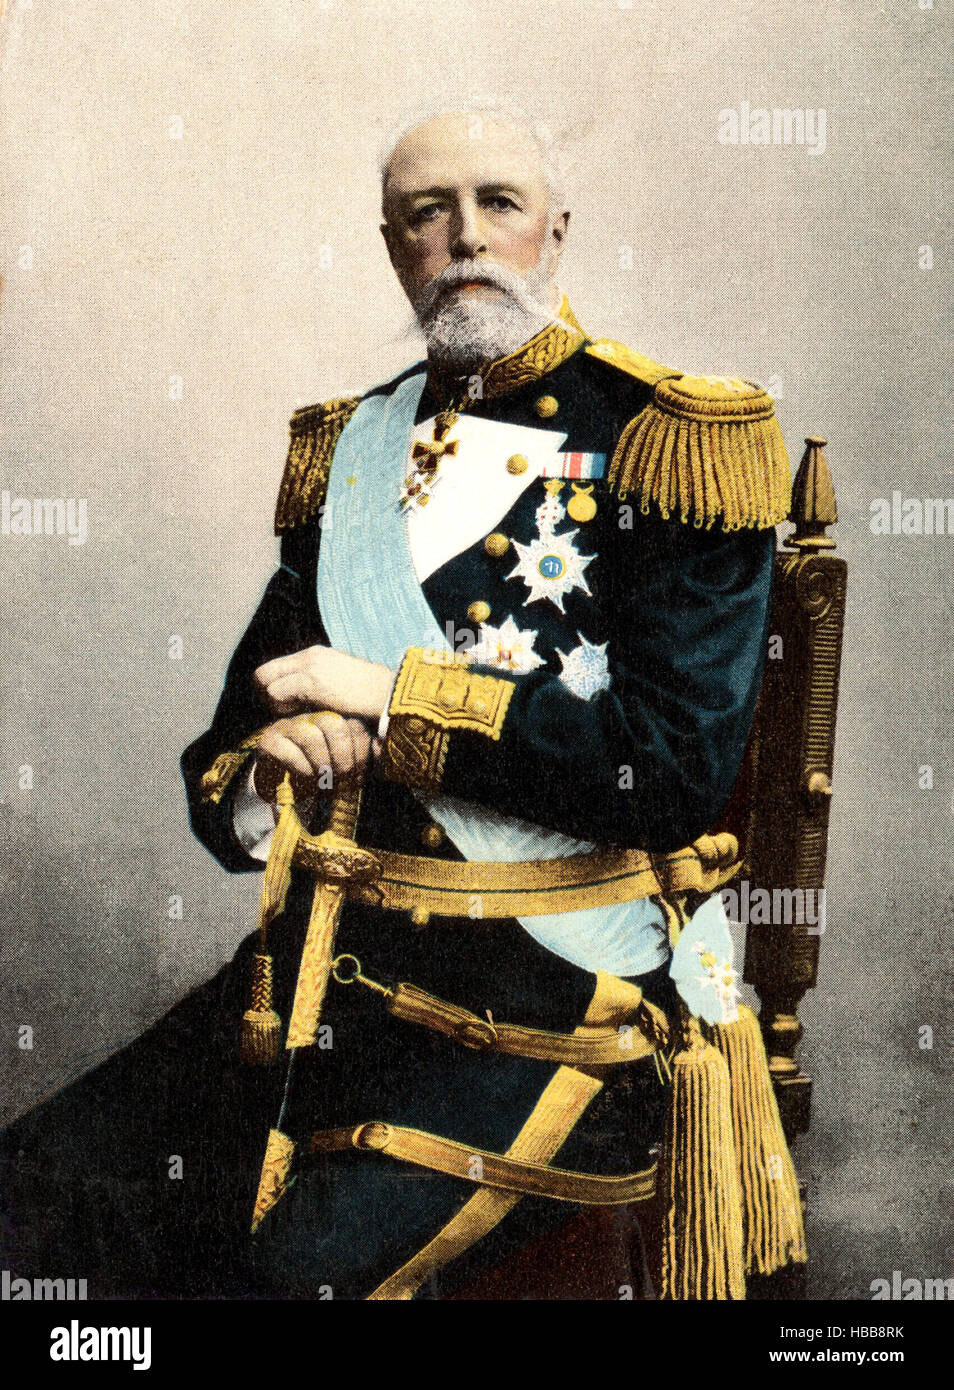 King Oscar II of Sweden and Norway, reigned 1872-1907 Stock Photo